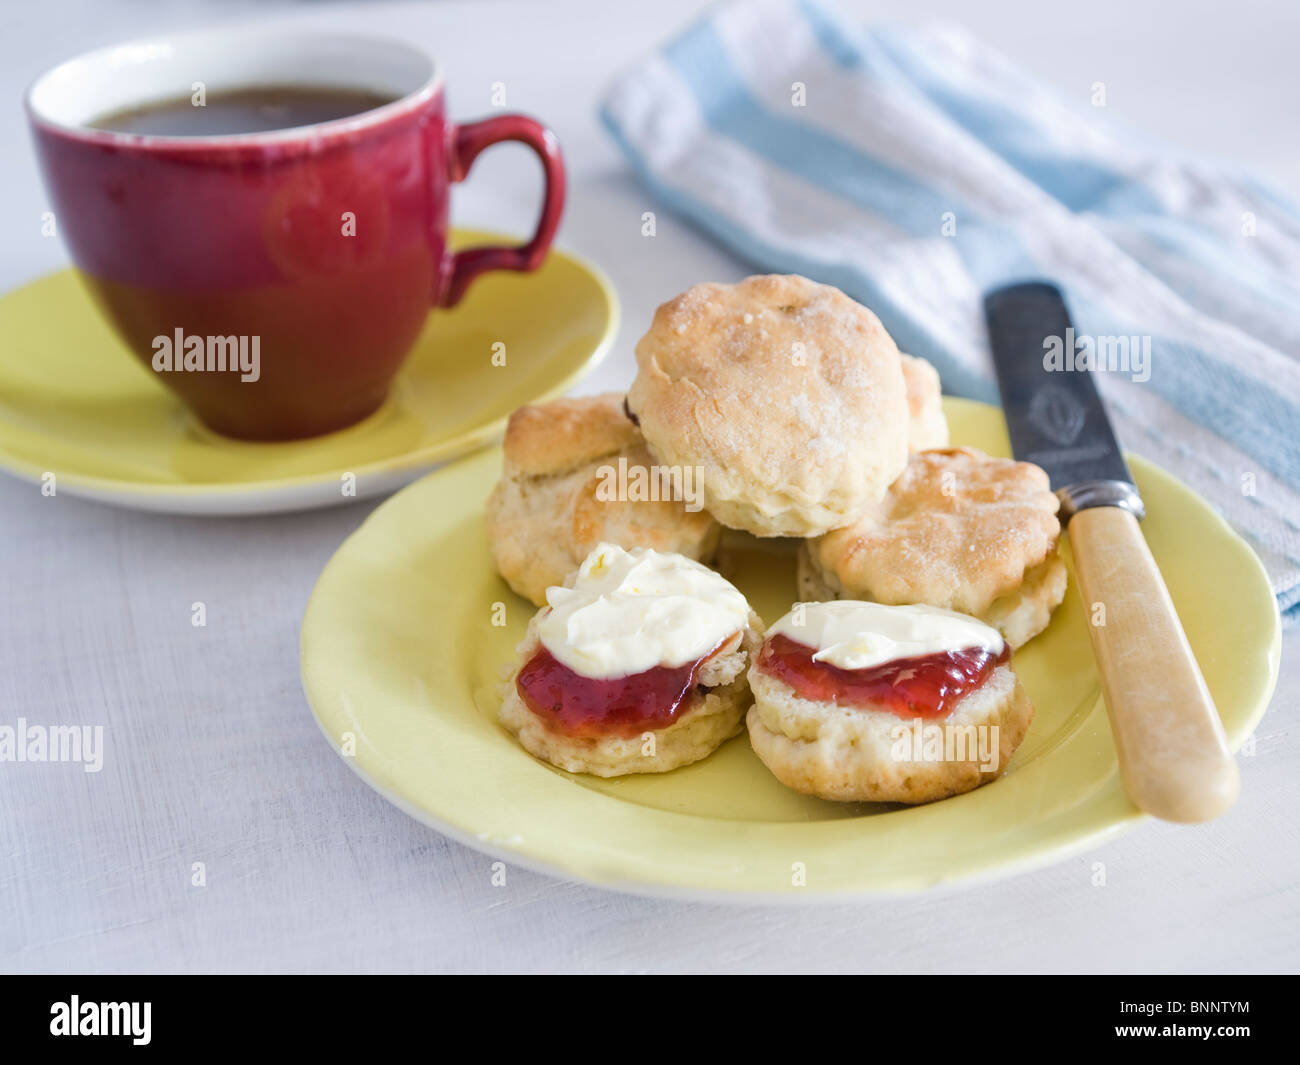 Still Life Of Scones With Clotted Cream And Jam Stock Photo Alamy